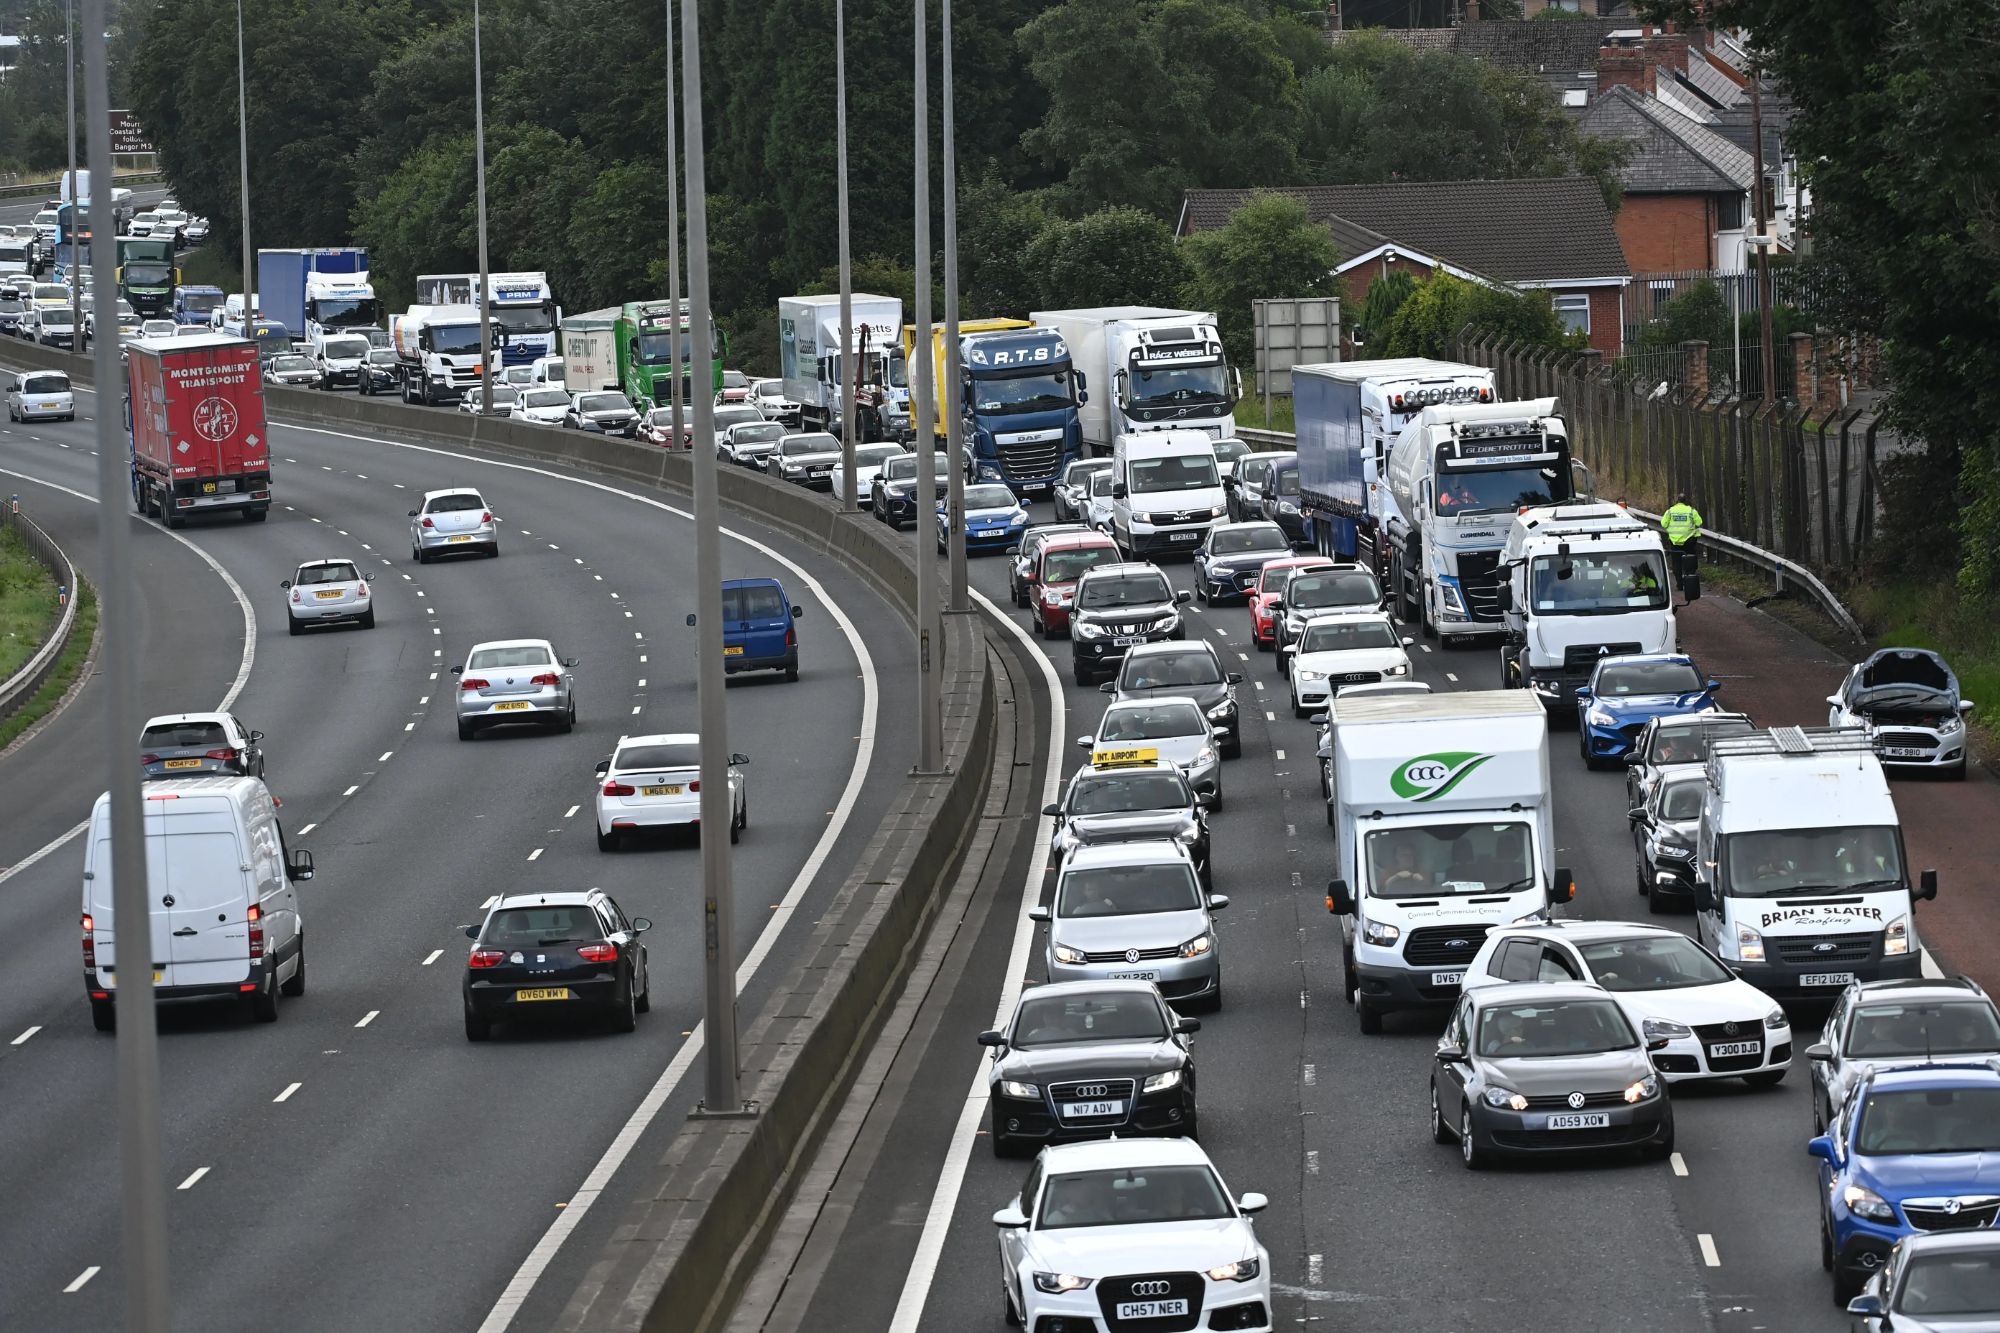 Drivers warned over travel chaos as major motorway set to close until next week